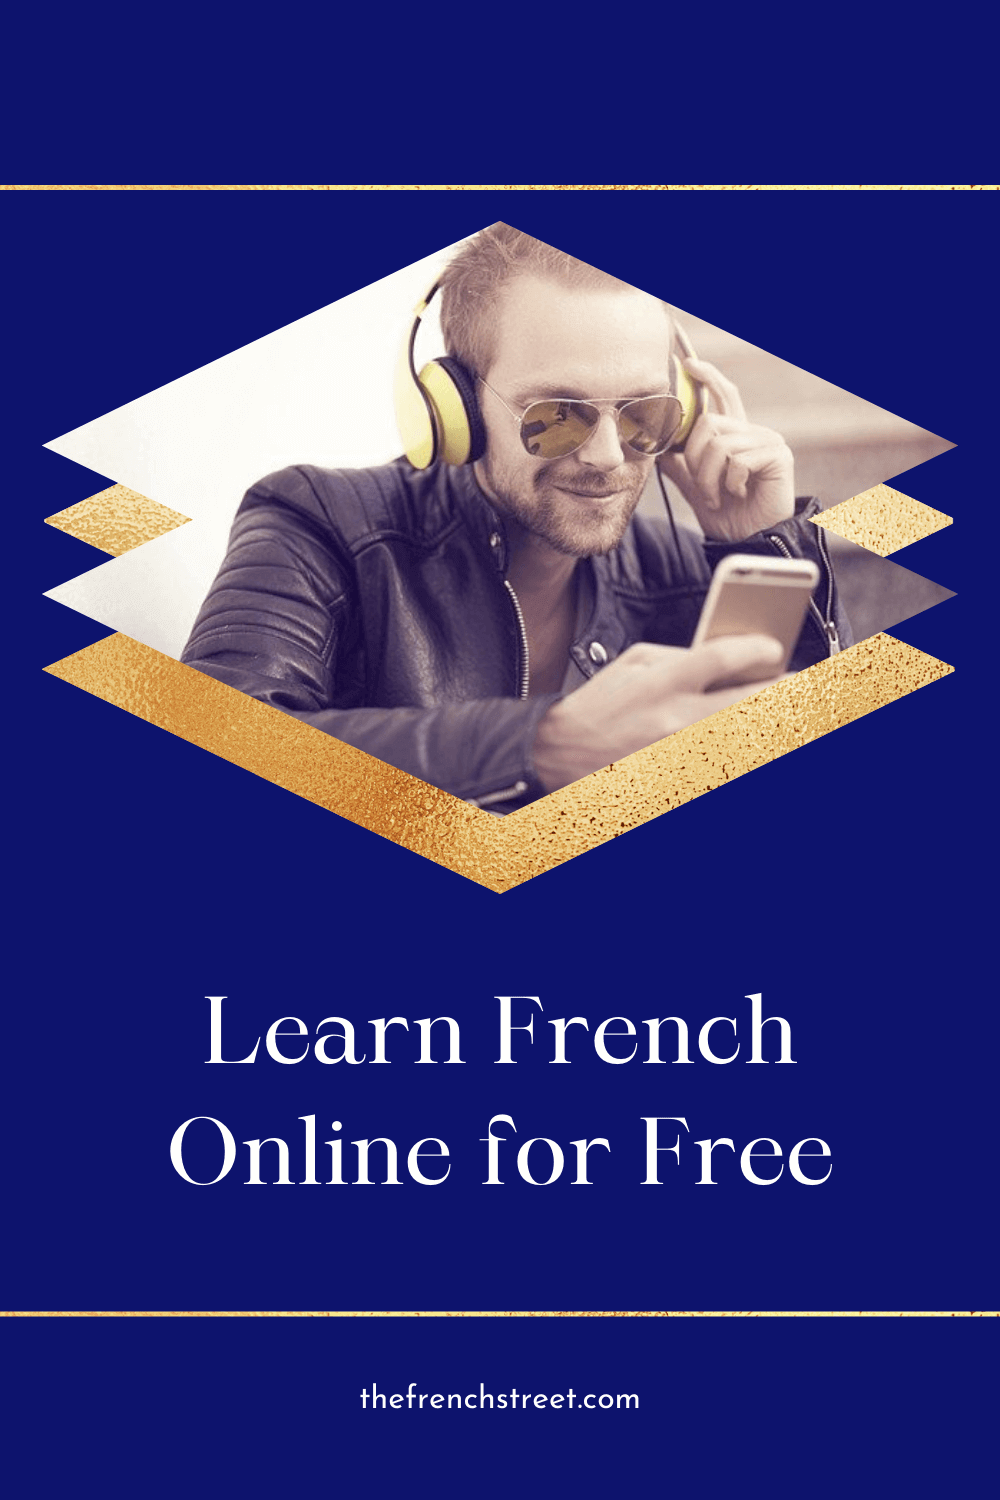 Learn French online for free.